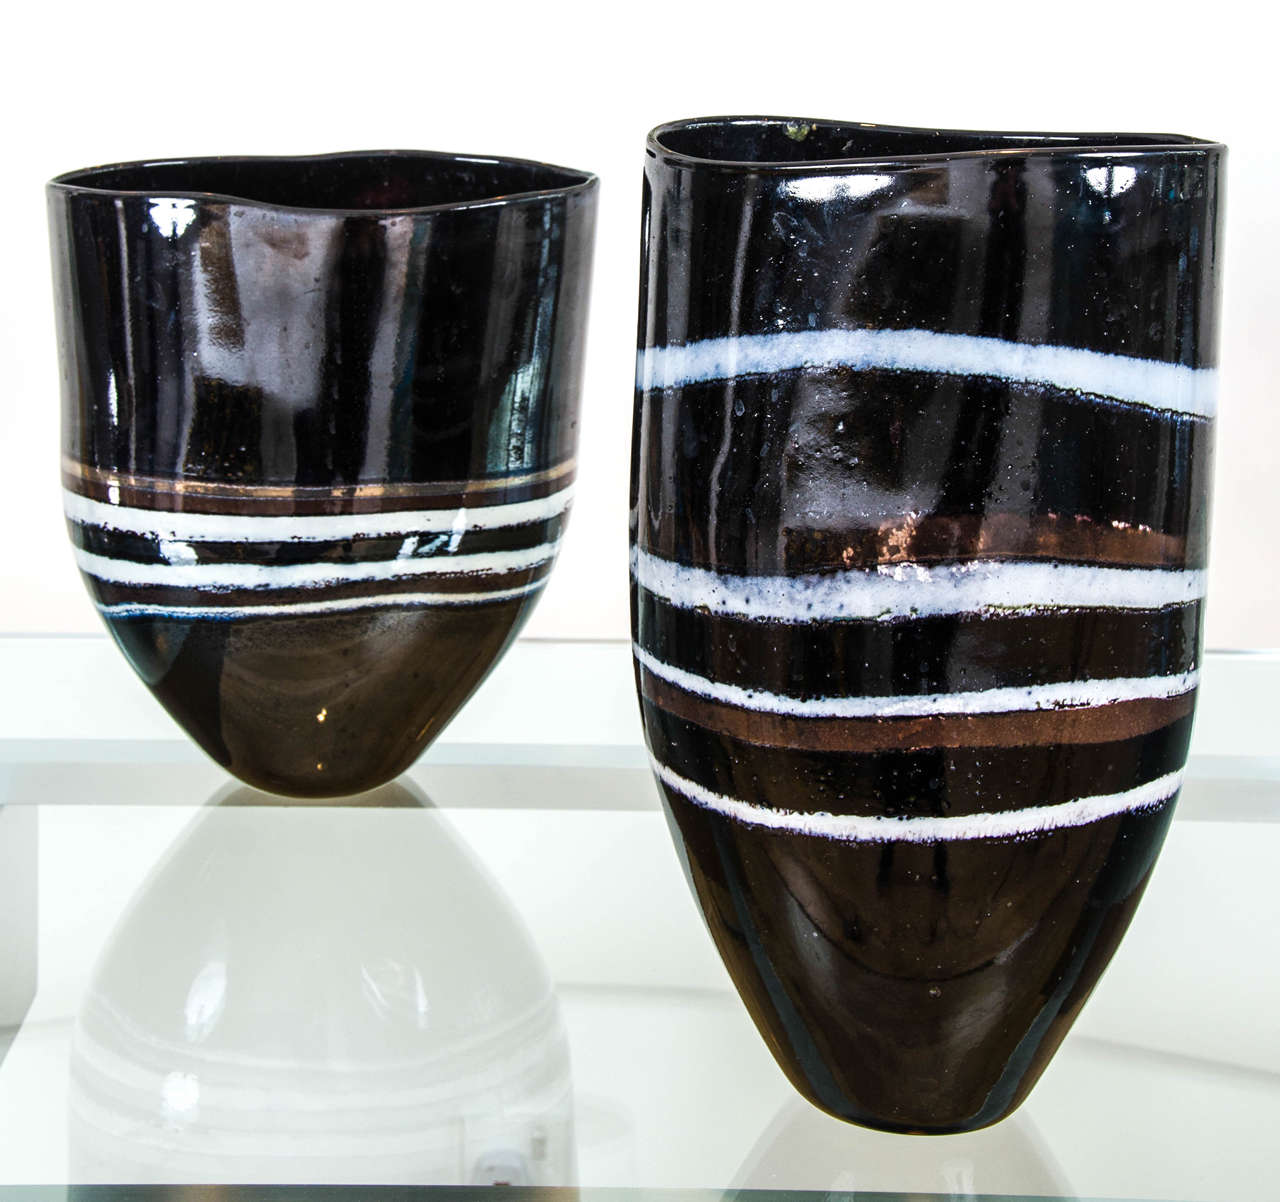 The Netherlands, 1990s
Free-form glass vases with metallic and white bands on an espresso black body,
Each with engraved signature
Larger: H 40 / W 24 / D 16 cm
Smaller: H 33 / W 47 / D 18 cm.